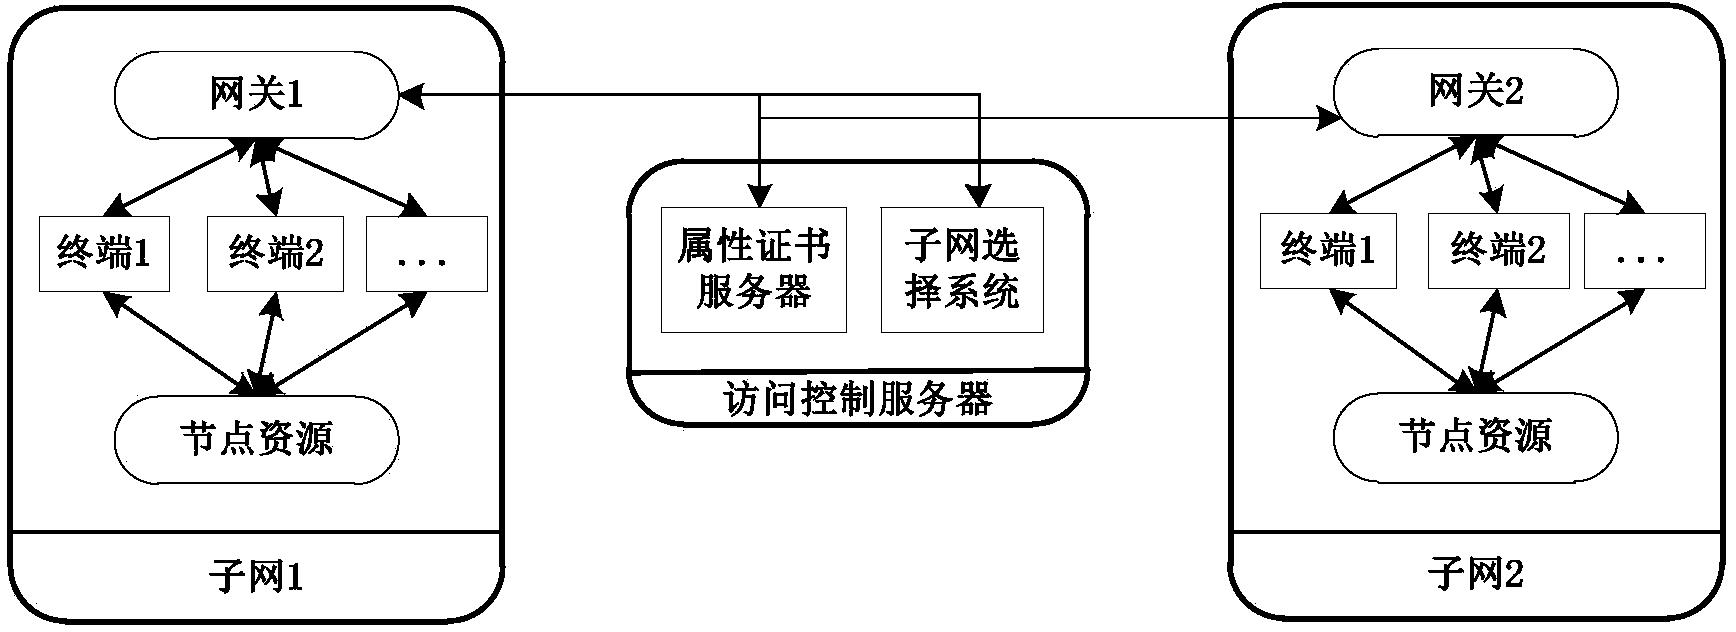 Cross-subnet access control method of electric power mobile terminal